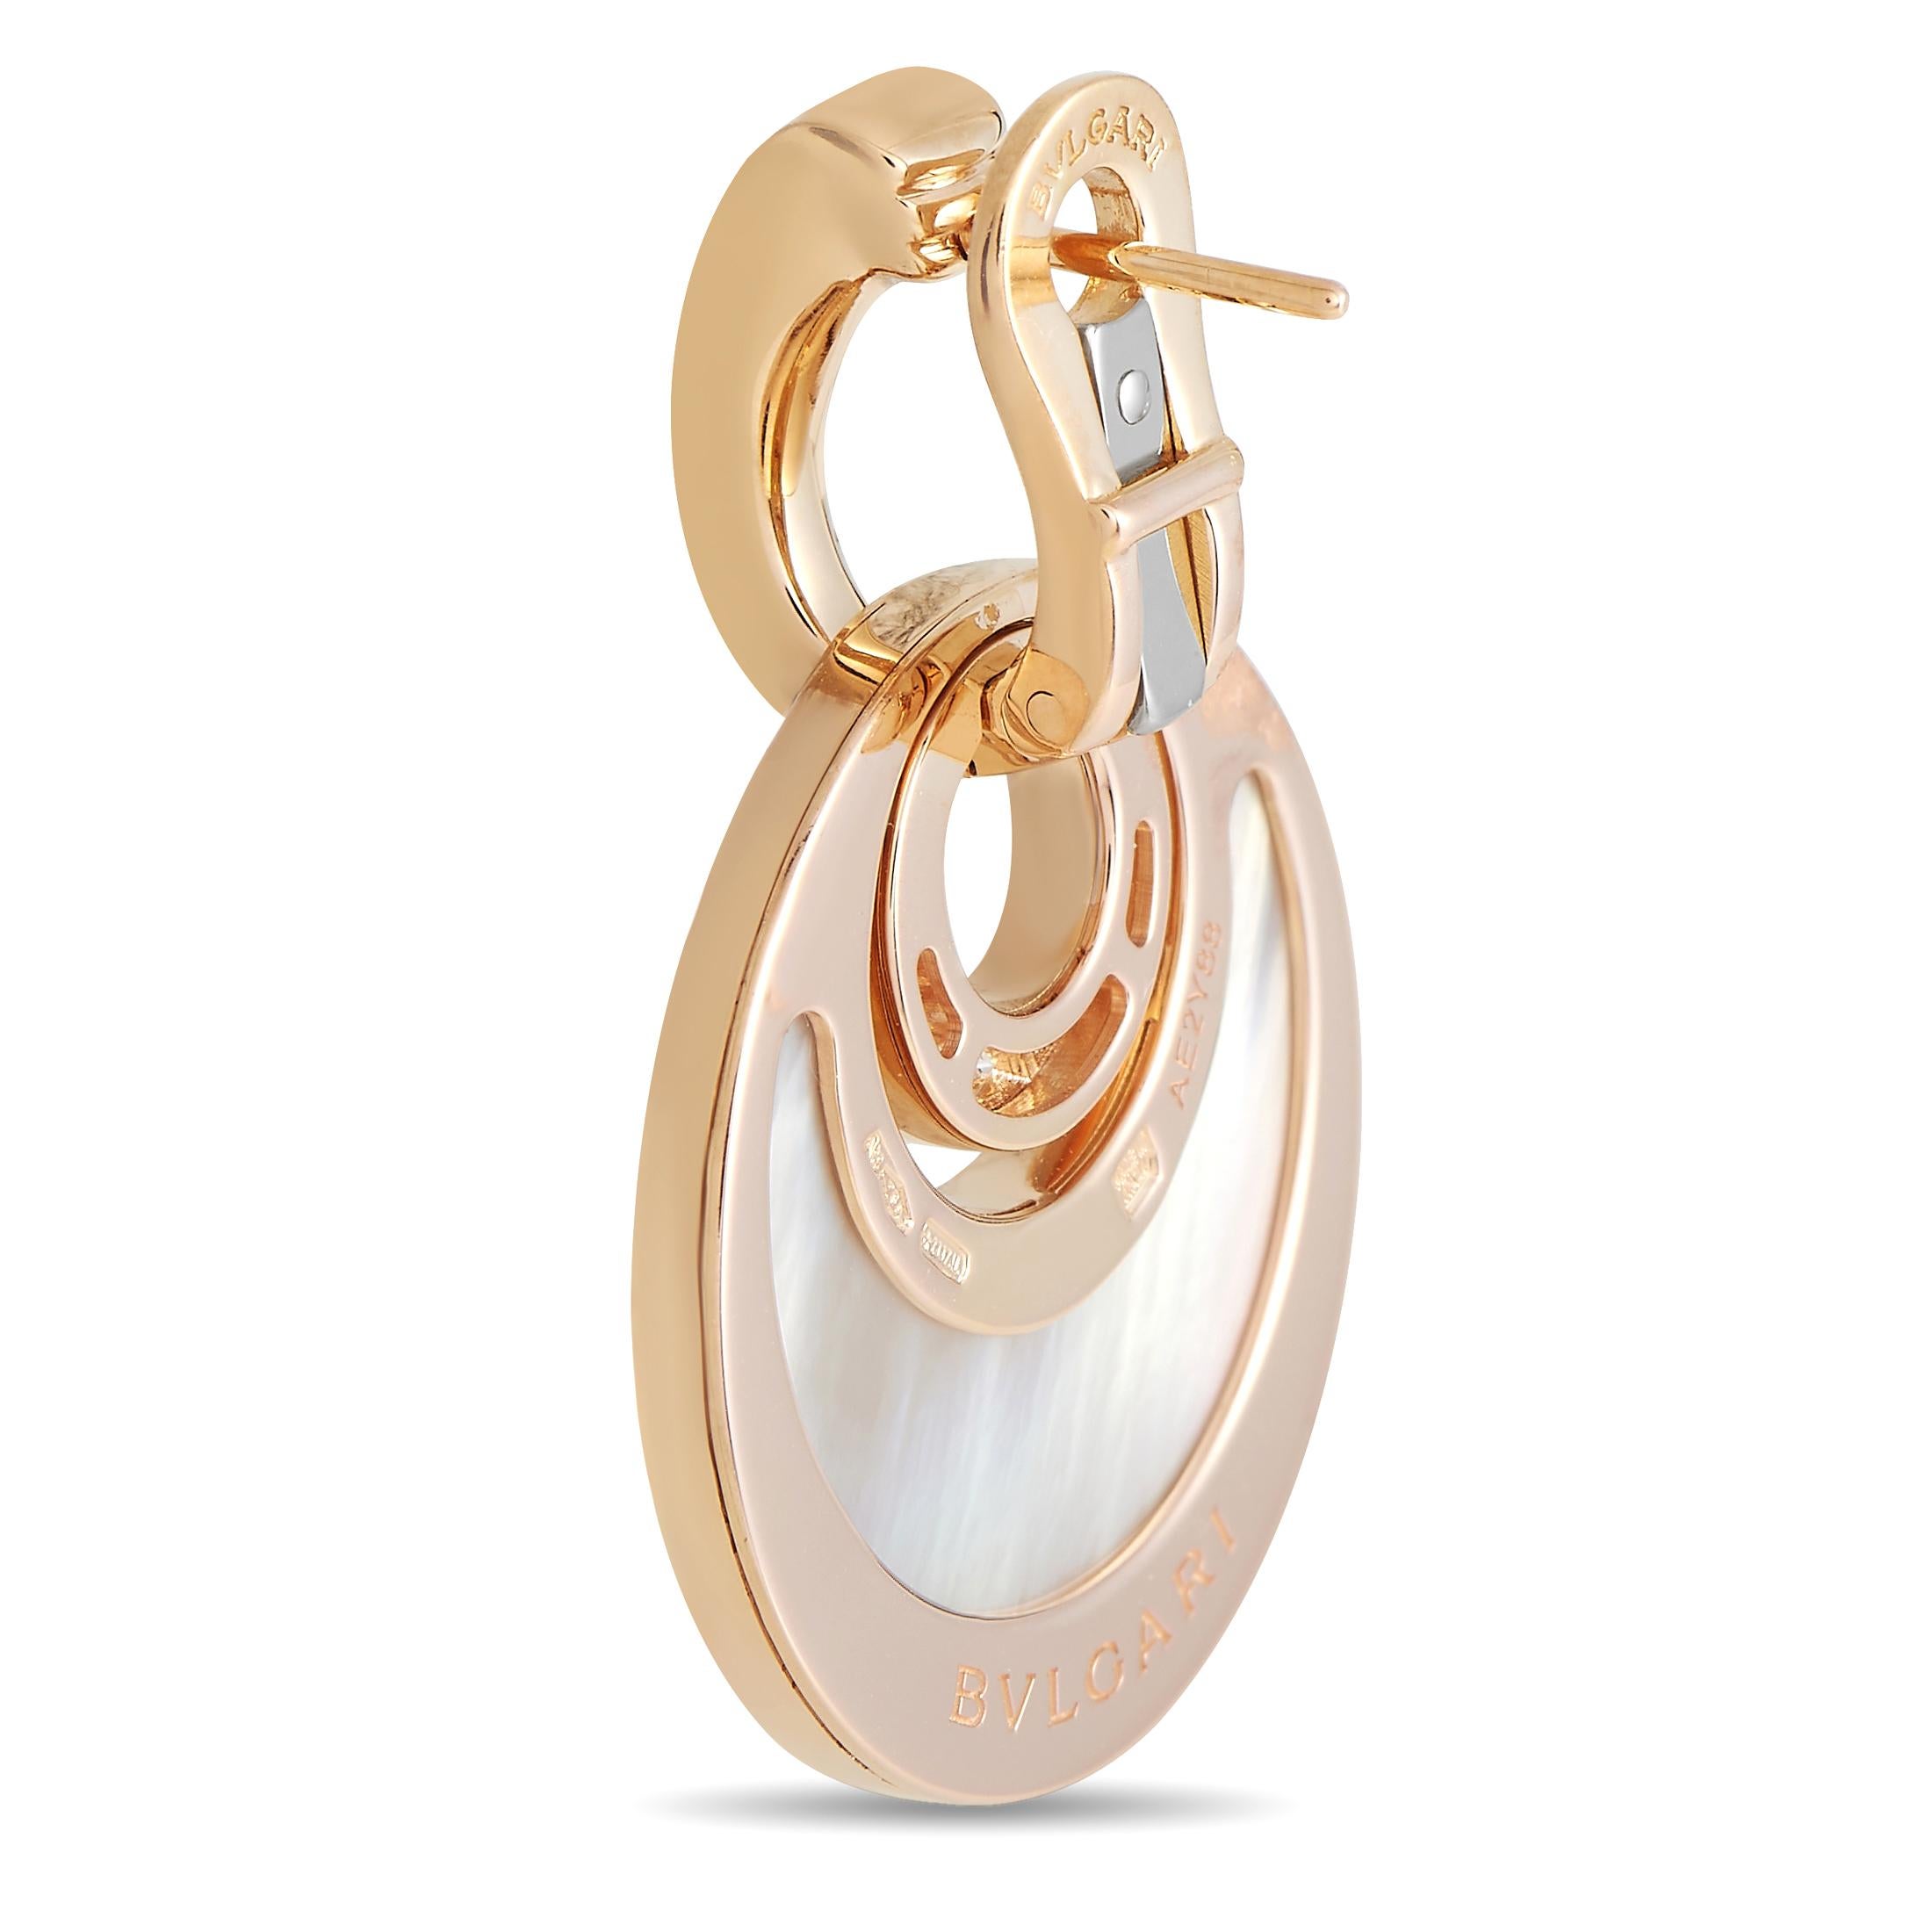 Opulent forms and stylish negative space accents make these Bvlgari Intarsio simply unforgettable. Crafted from lustrous 18K Rose Gold, Diamonds with a total weight of 0.70 carats add a touch of luxury to their contemporary, modern design. Each one